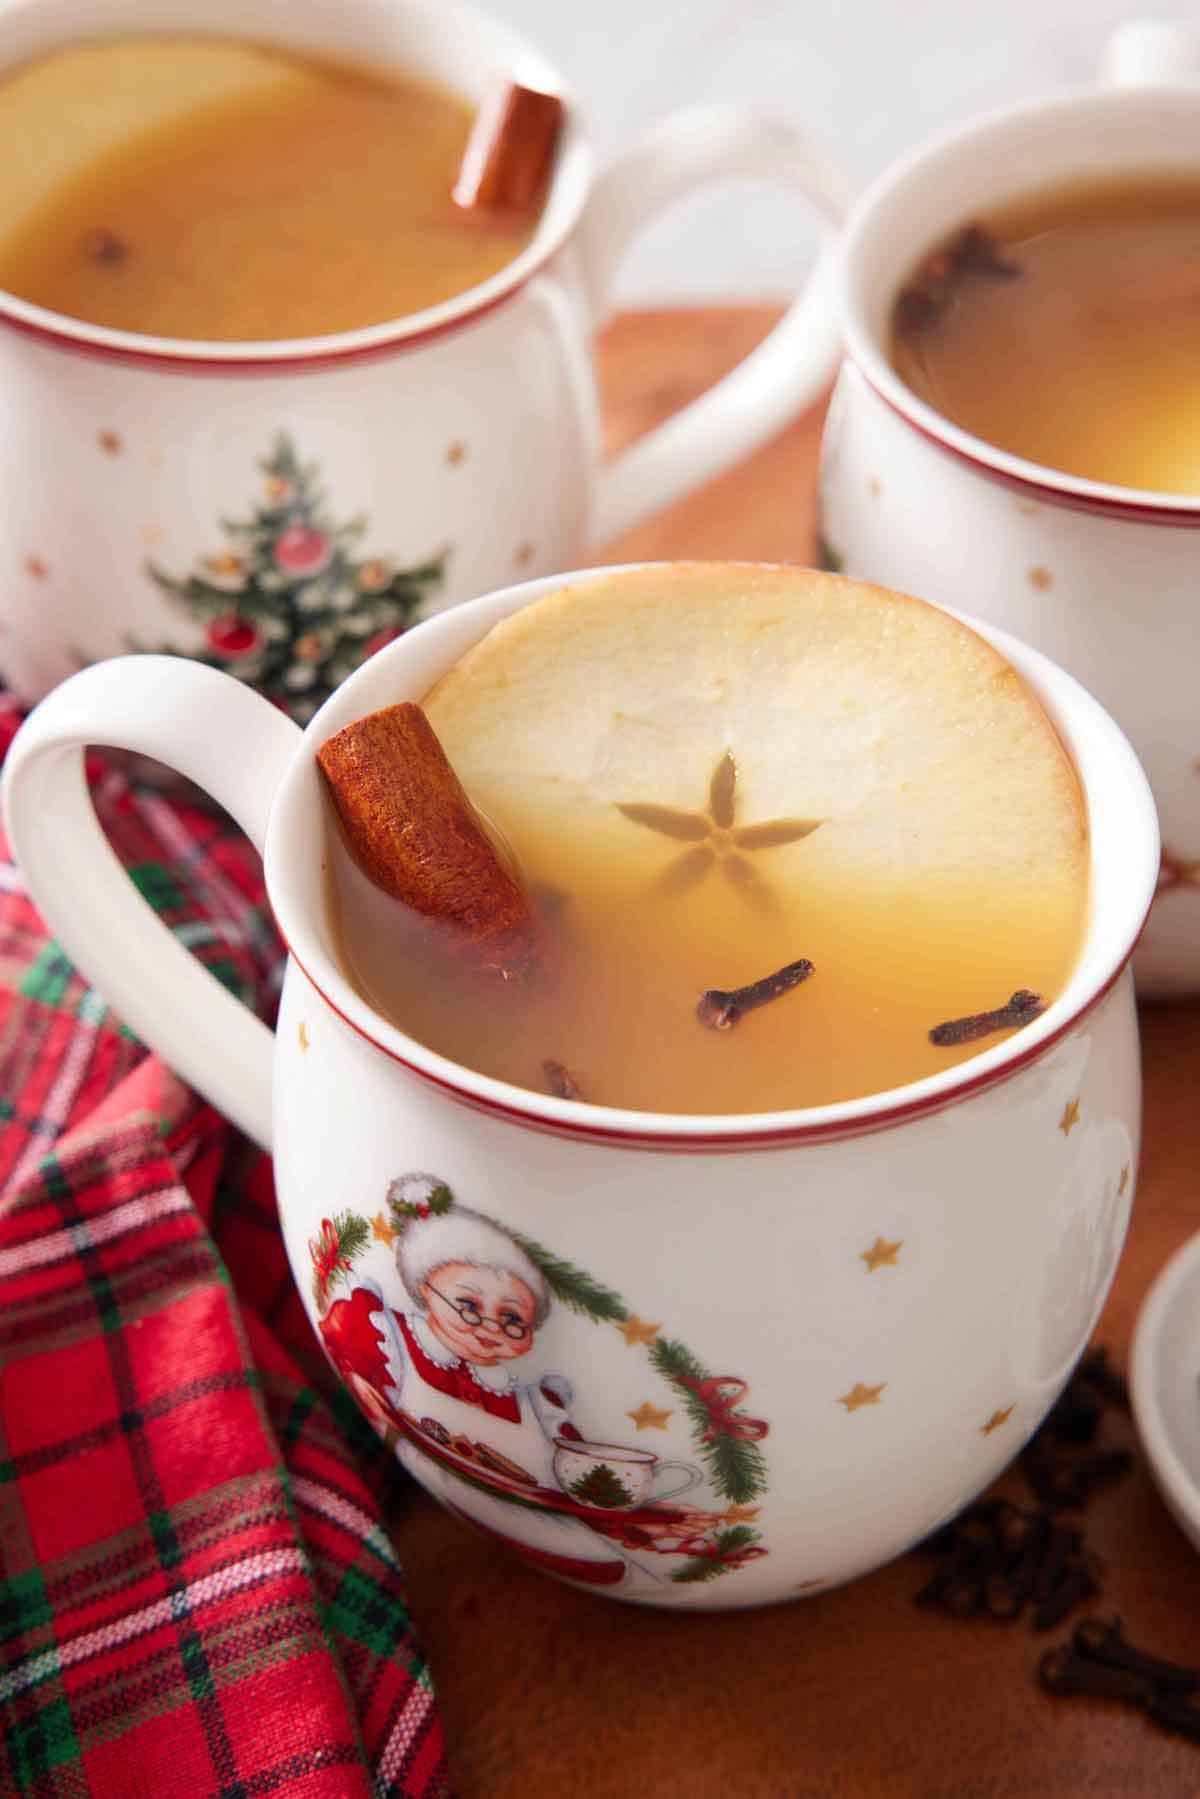 A festive mug of wassail with a cinnamon stick, apple slice, and cloves. More mugs in the back.